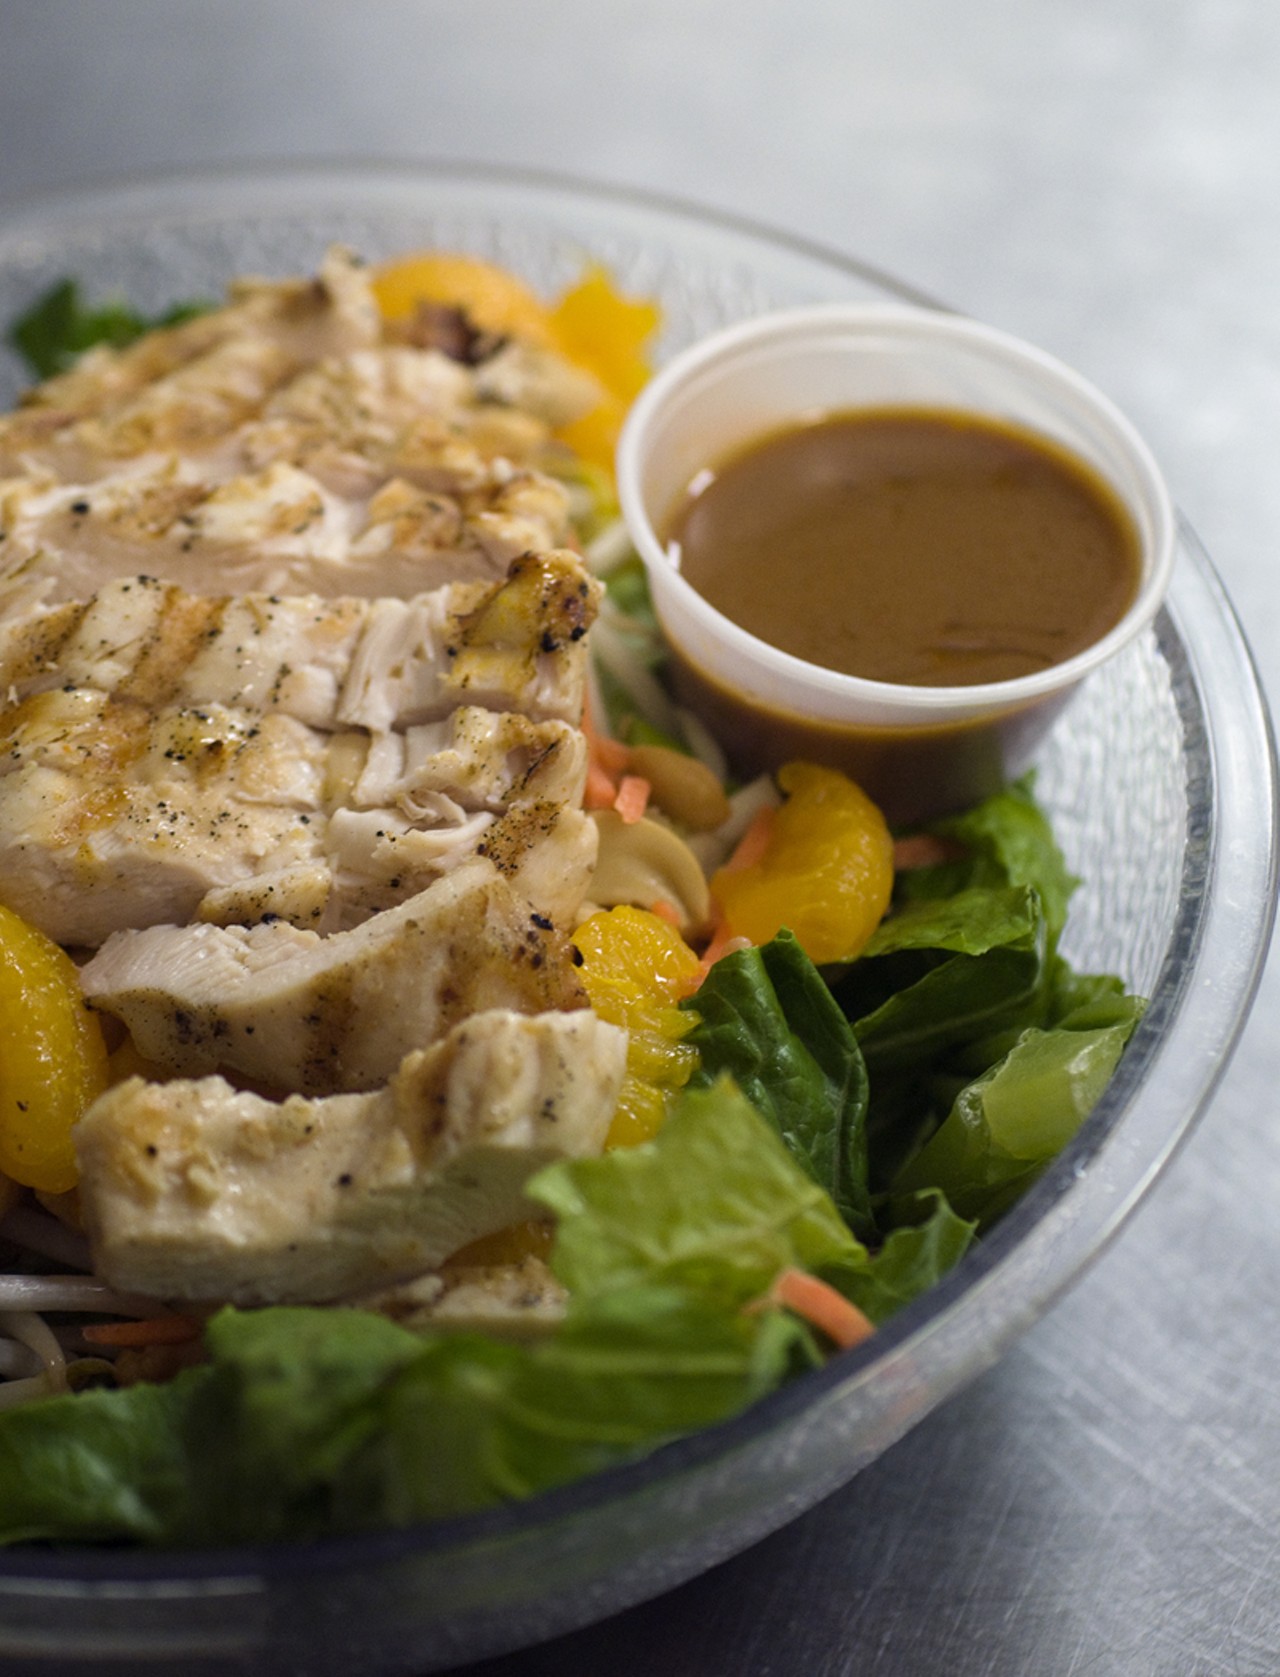 That same grilled chicken, now atop the Thai Chicken Salad, which is comprised of grilled marinated chicken atop crisp romaine, bean sprouts, cashews, mandarin oranges, green onion, carrot and a side of Thai peanut sauce.